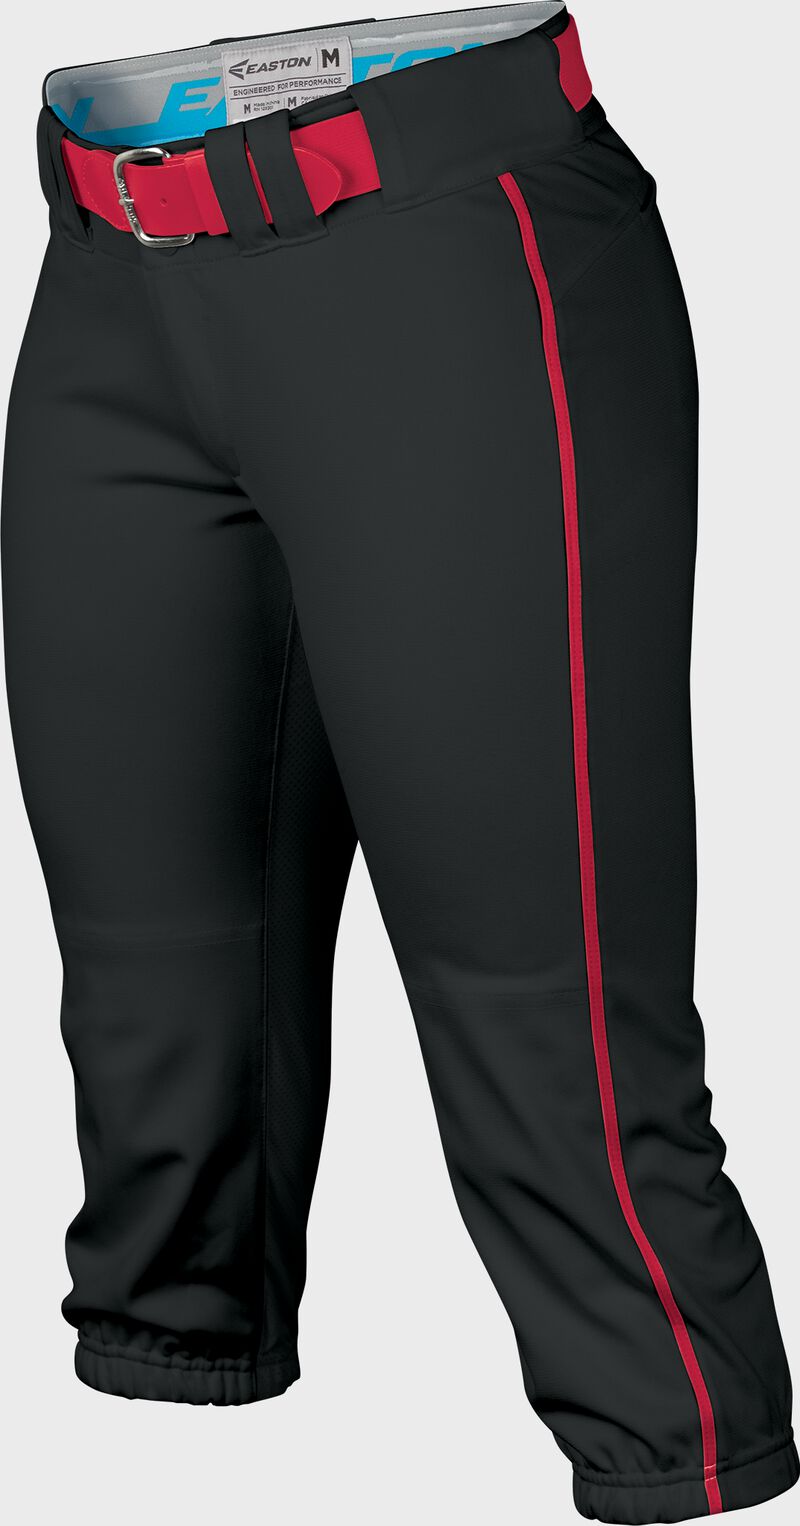 Easton Prowess Softball Pant Women's Piped BLACK/RED  XL